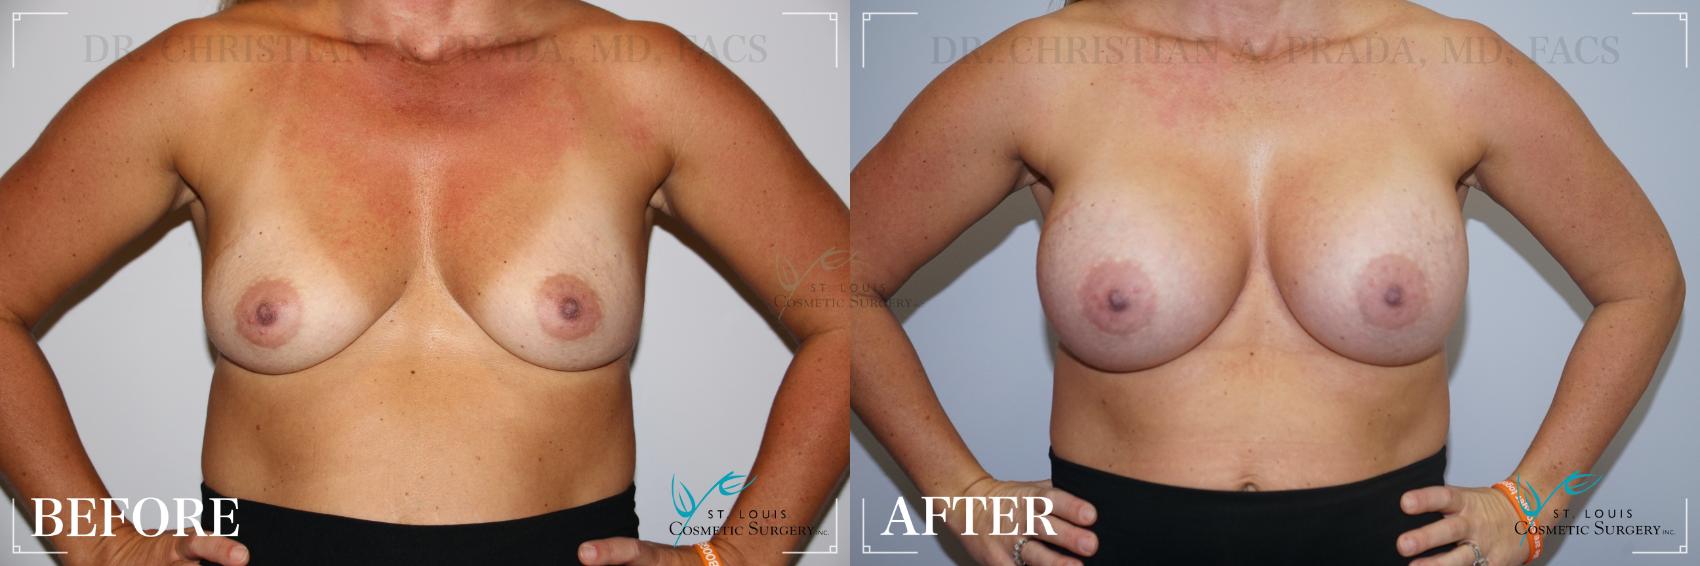 Before & After Breast Augmentation Case 201 Front View in St. Louis, MO